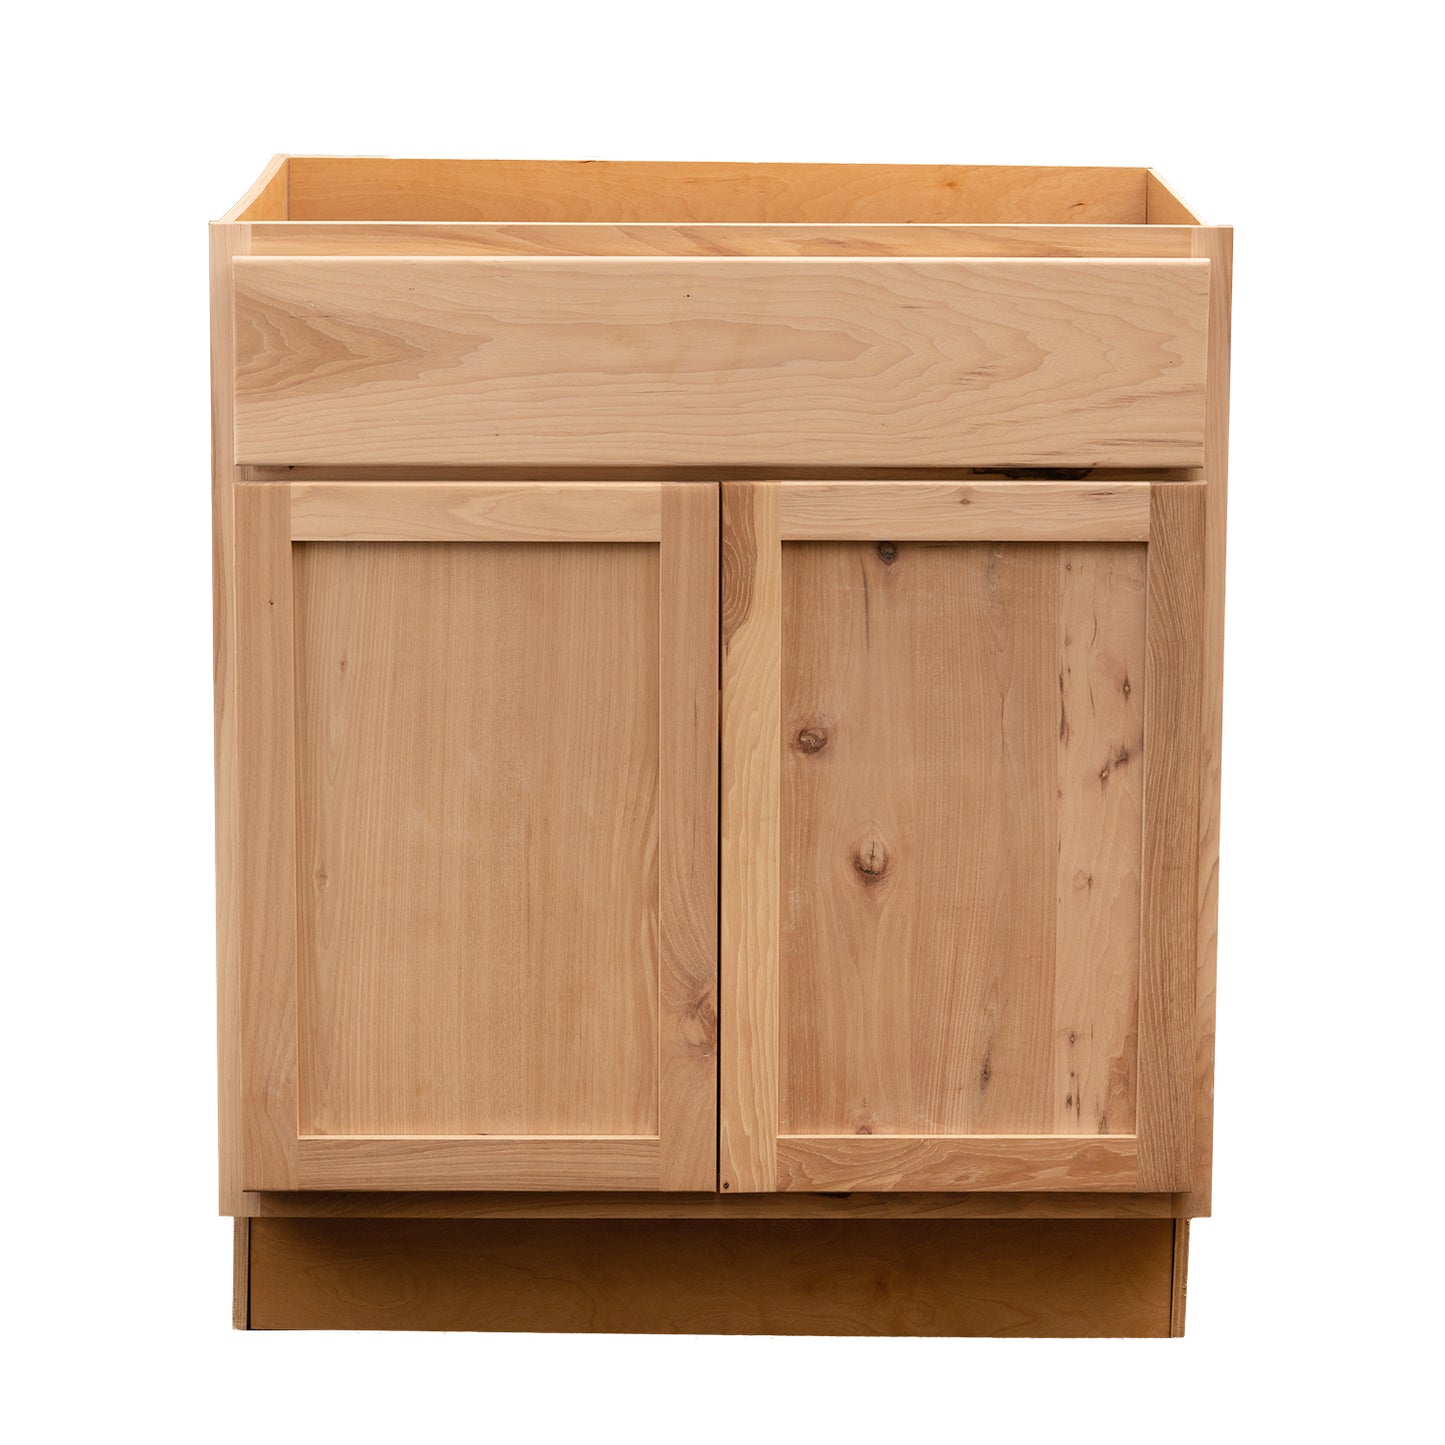 Quicklock RTA (Ready-to-Assemble) Raw Hickory Base Cabinet- Large